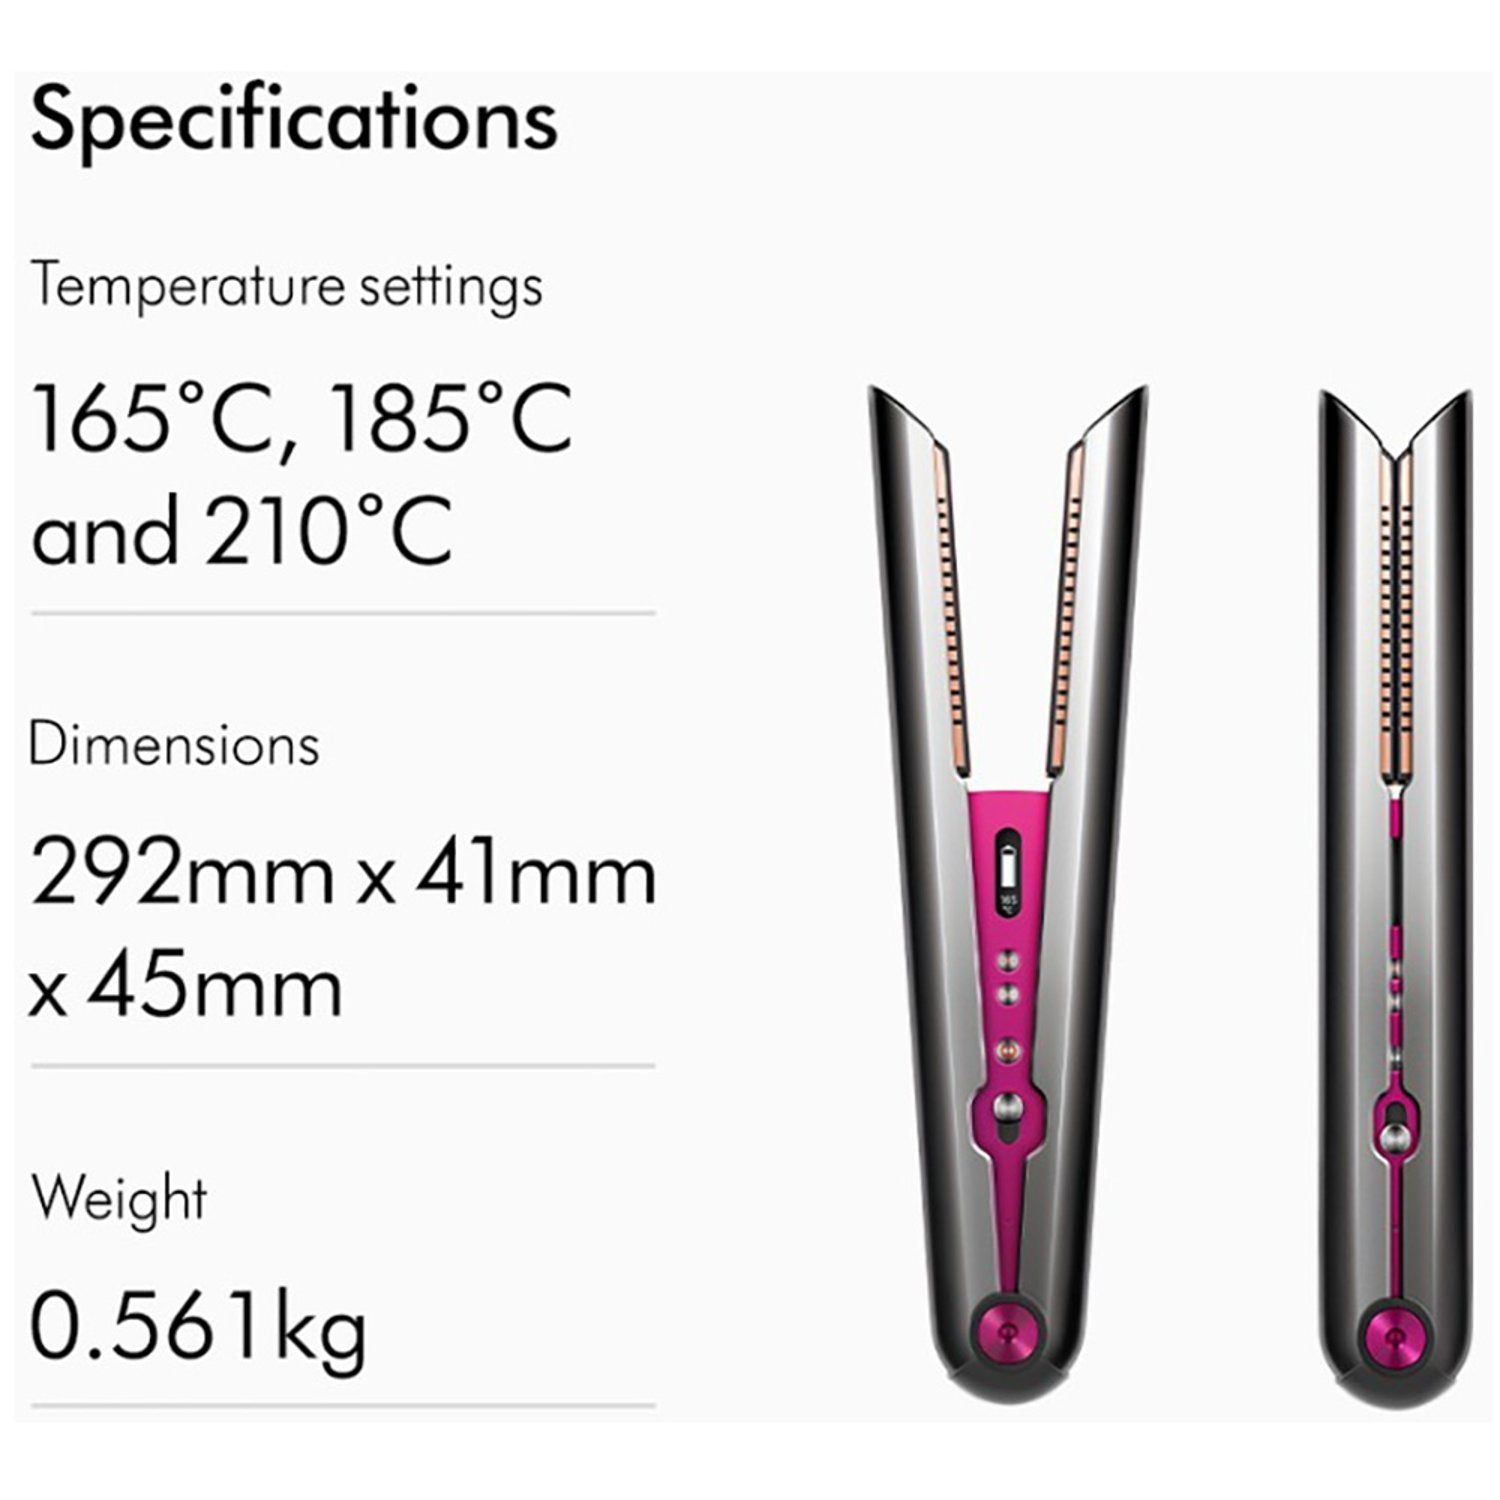 Dyson Corrale Professional Cord-Less Hair Straightener - Frizz Removing Flexing Plates, for all hair types Nickel Fuchsia HS07